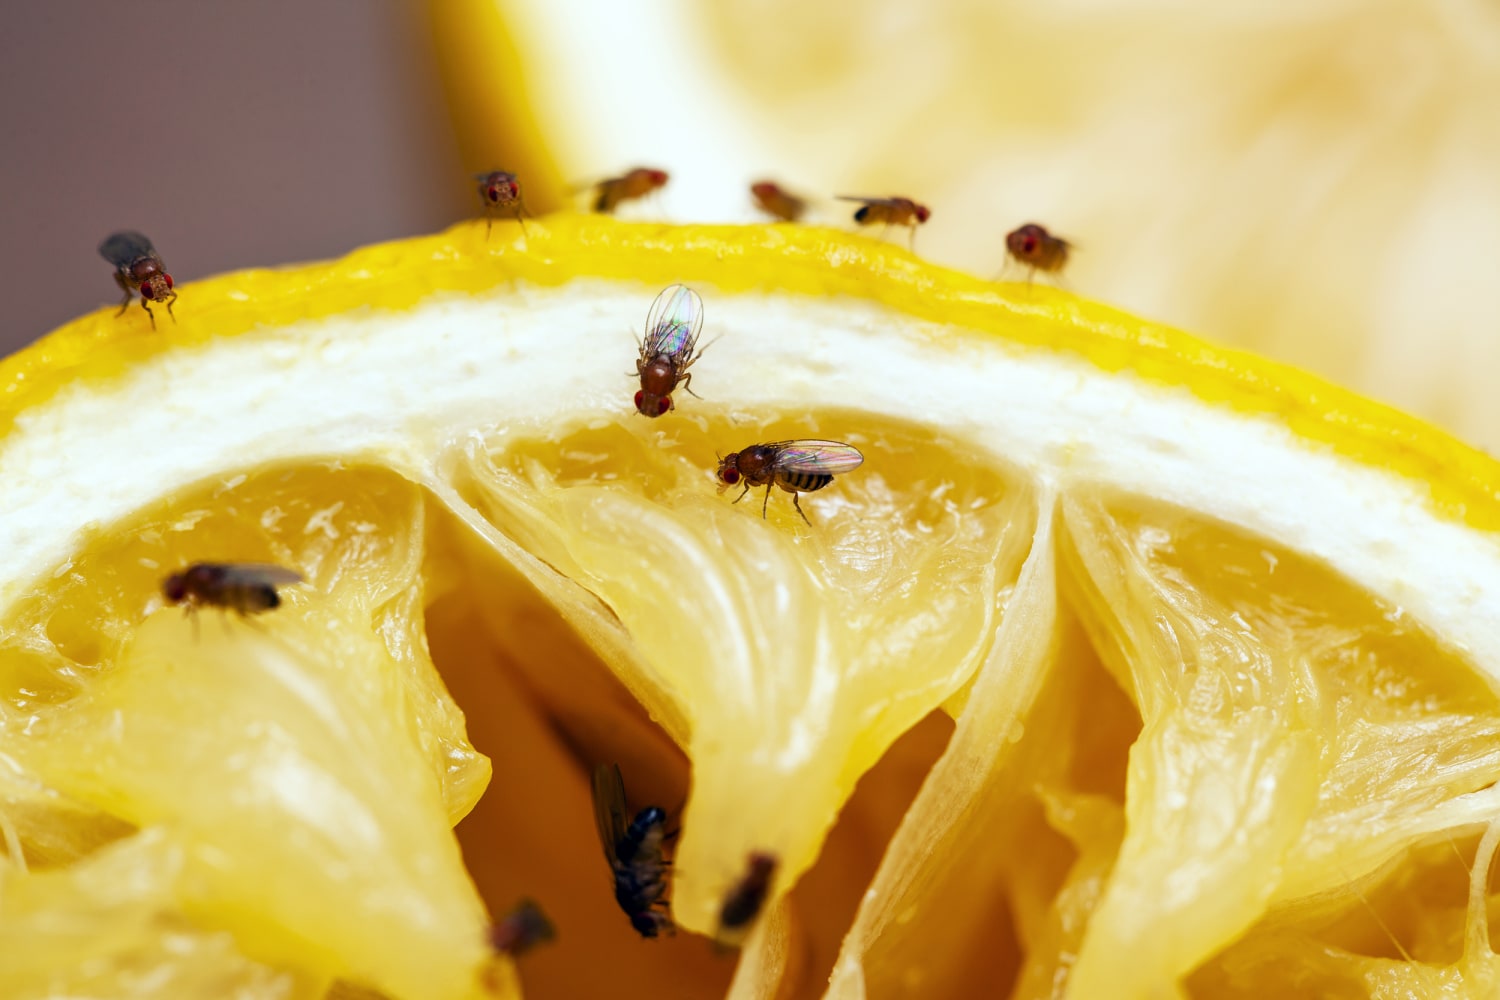 https://media-cldnry.s-nbcnews.com/image/upload/t_fit-1500w,f_auto,q_auto:best/newscms/2023_25/2005898/how-to-get-rid-of-fruit-flies.jpg